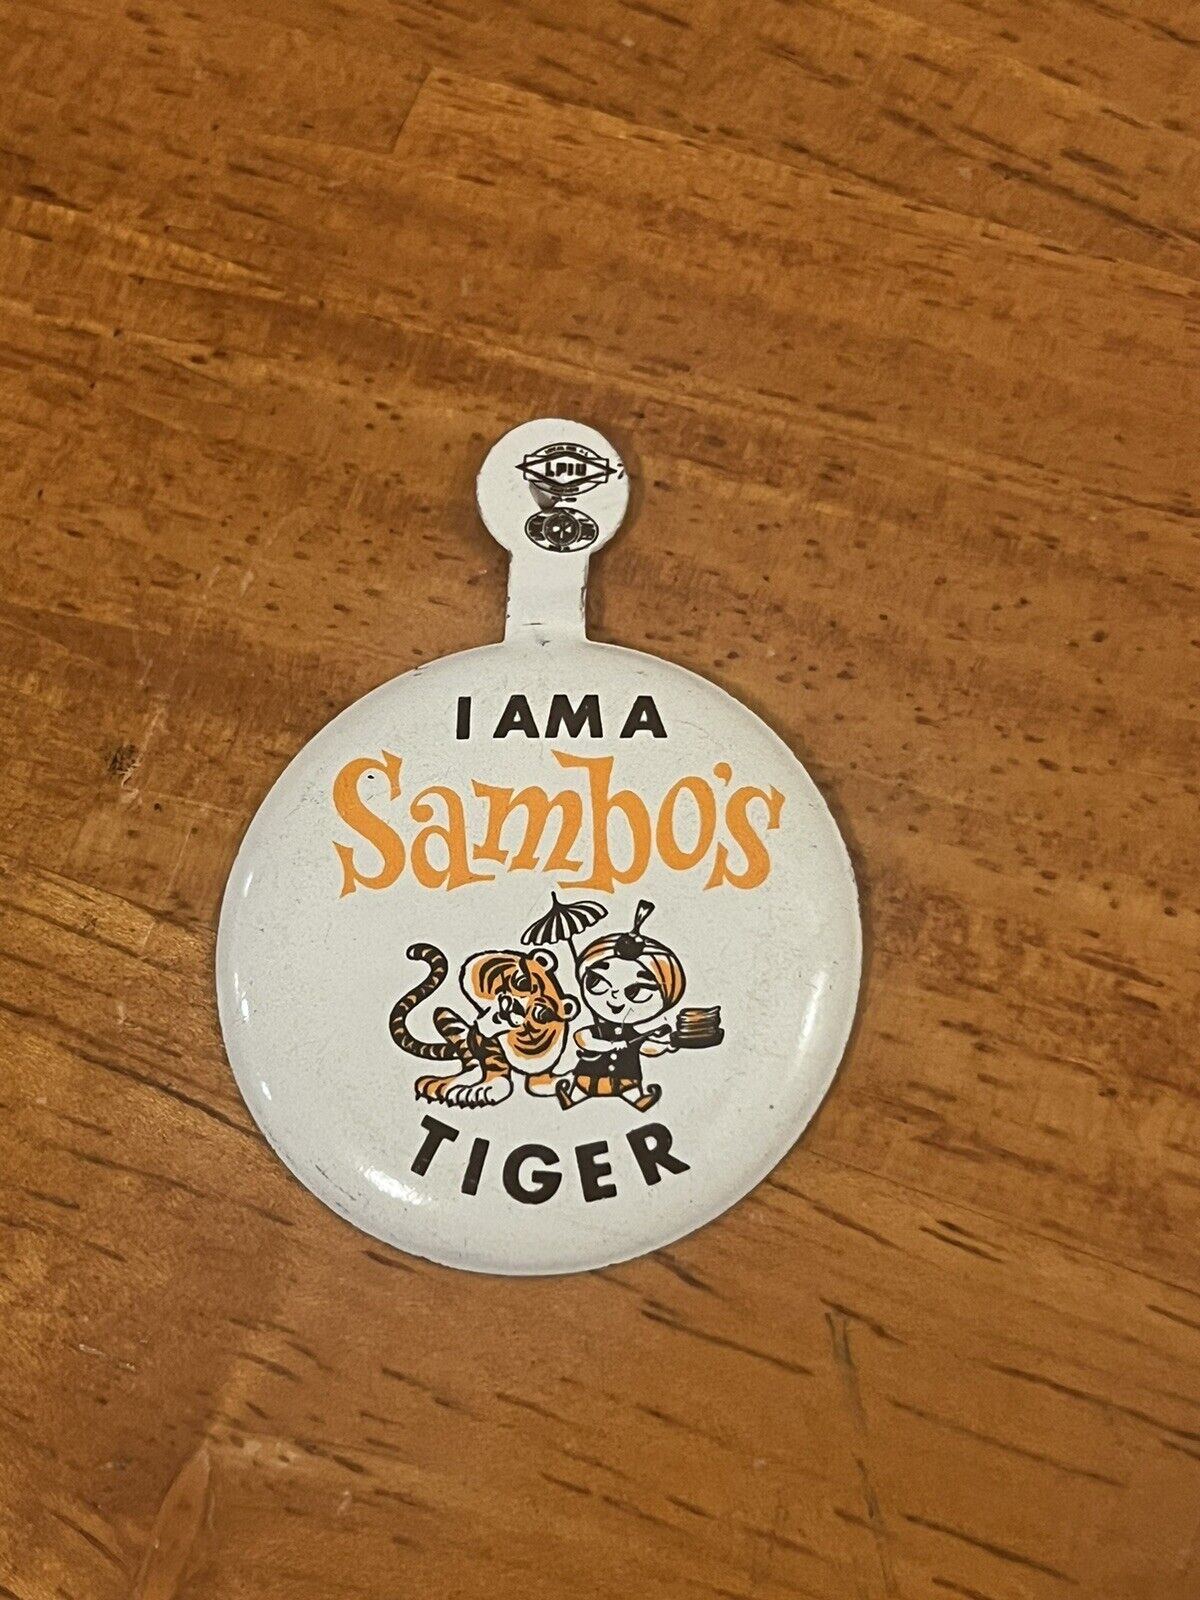 I Am A Sambo’s Tiger Button from Sambo’s Restaurant 1960s or 1970s